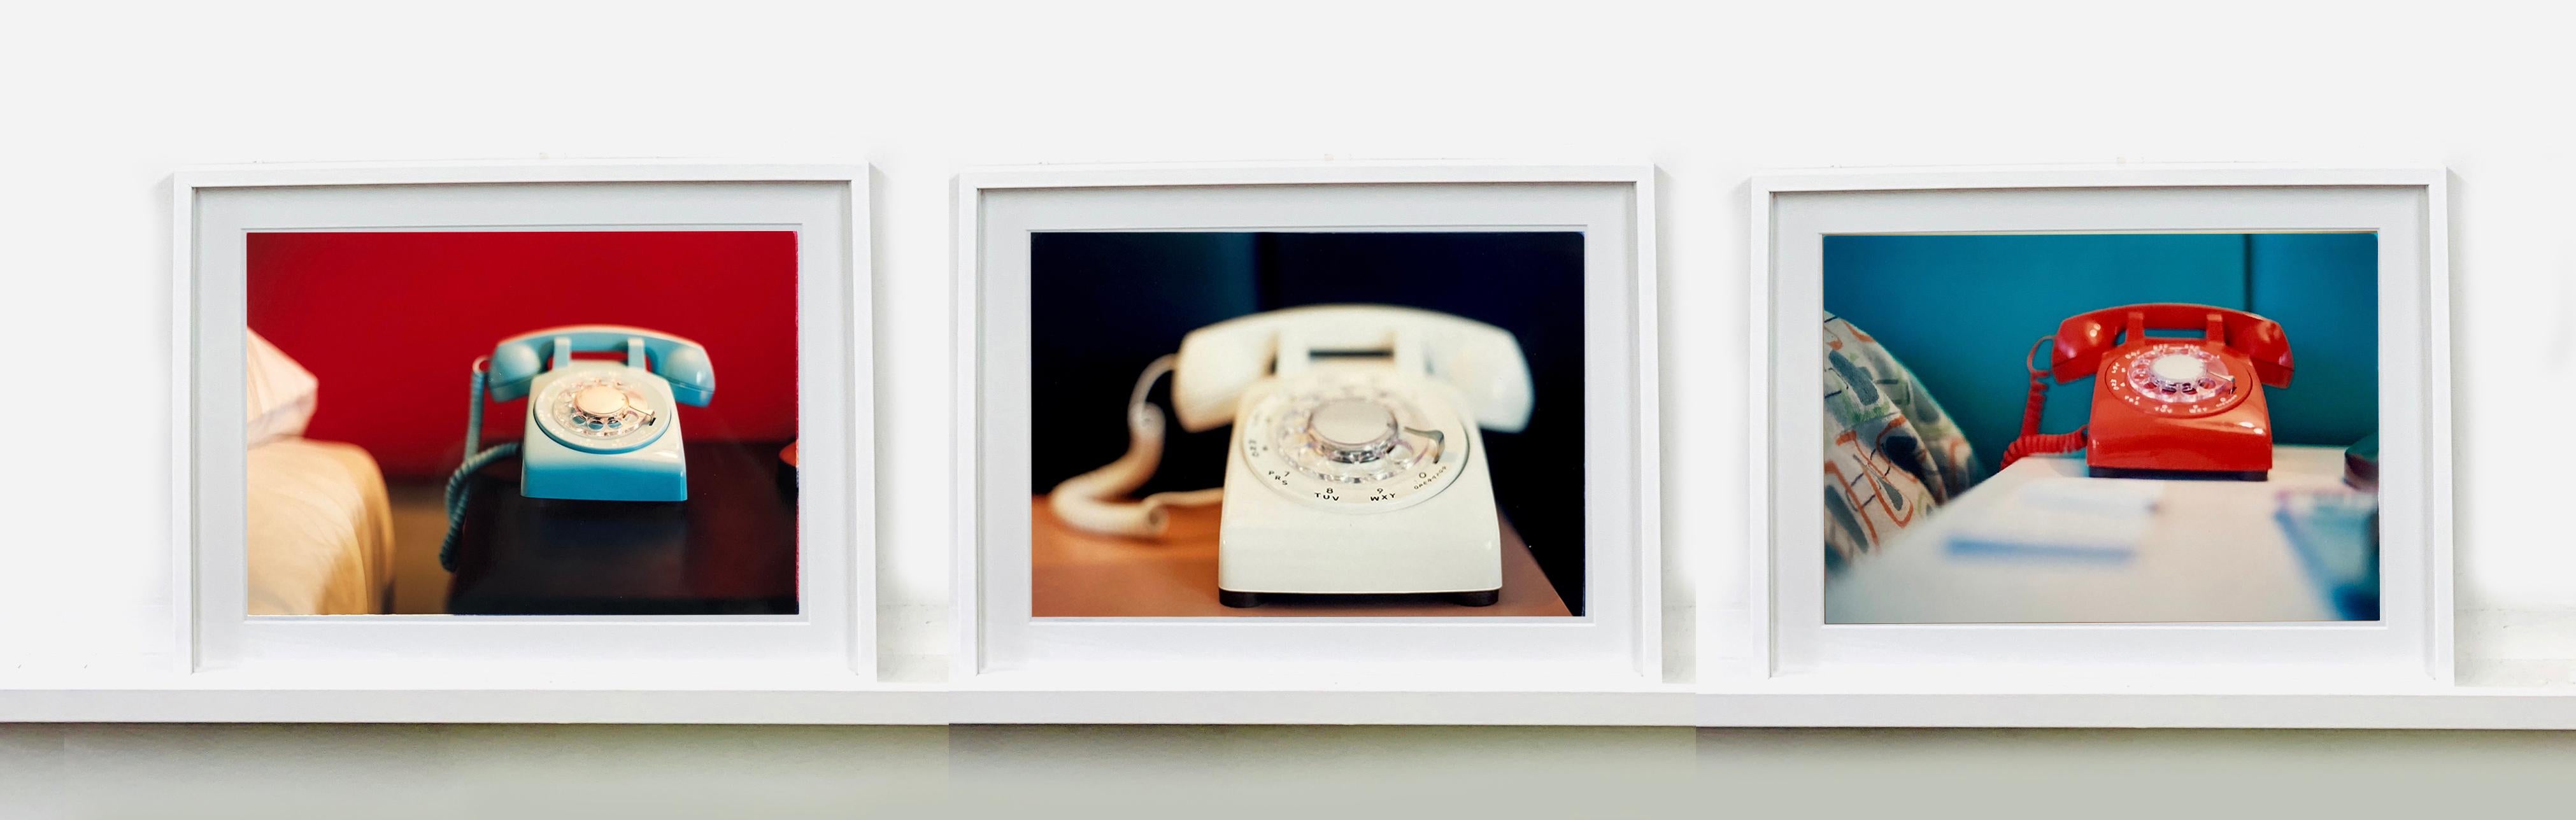 'Telephone VI' part of Richard Heeps 'Dream in Colour' Series. 
This cool Palm Springs interior photography featuring a vintage telephone on a nightstand combines gorgeous colours of bright red and deep teal and it has a mid-century modern nostalgic